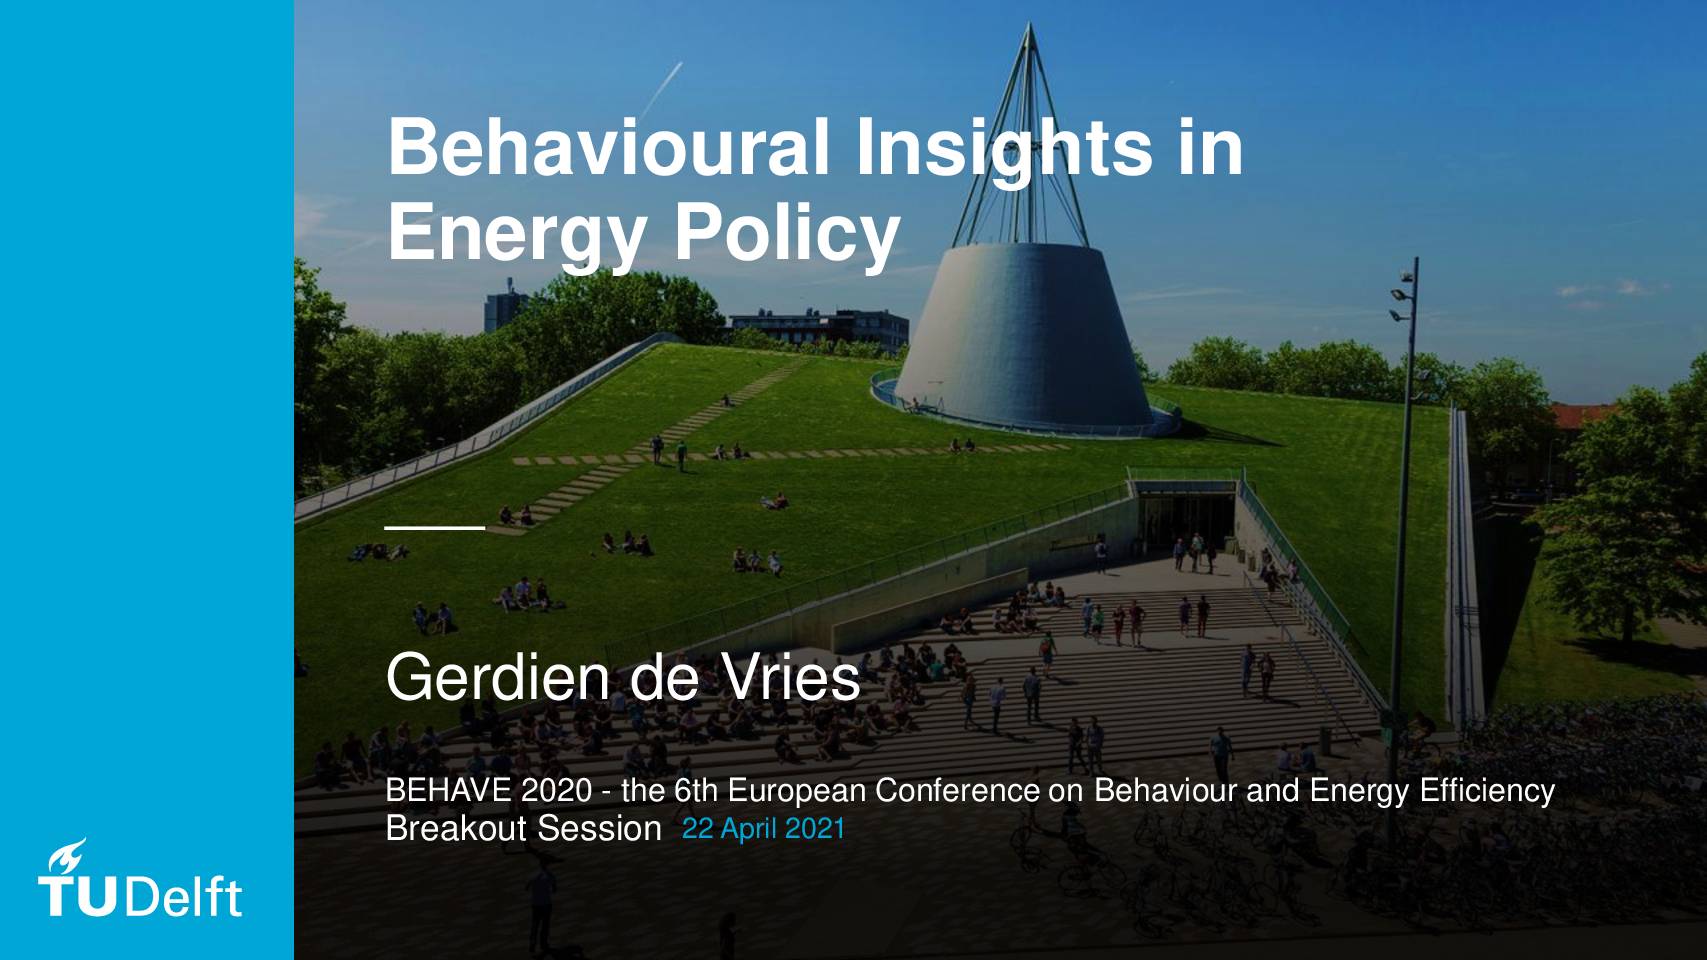 Behavioural insights into energy policy making